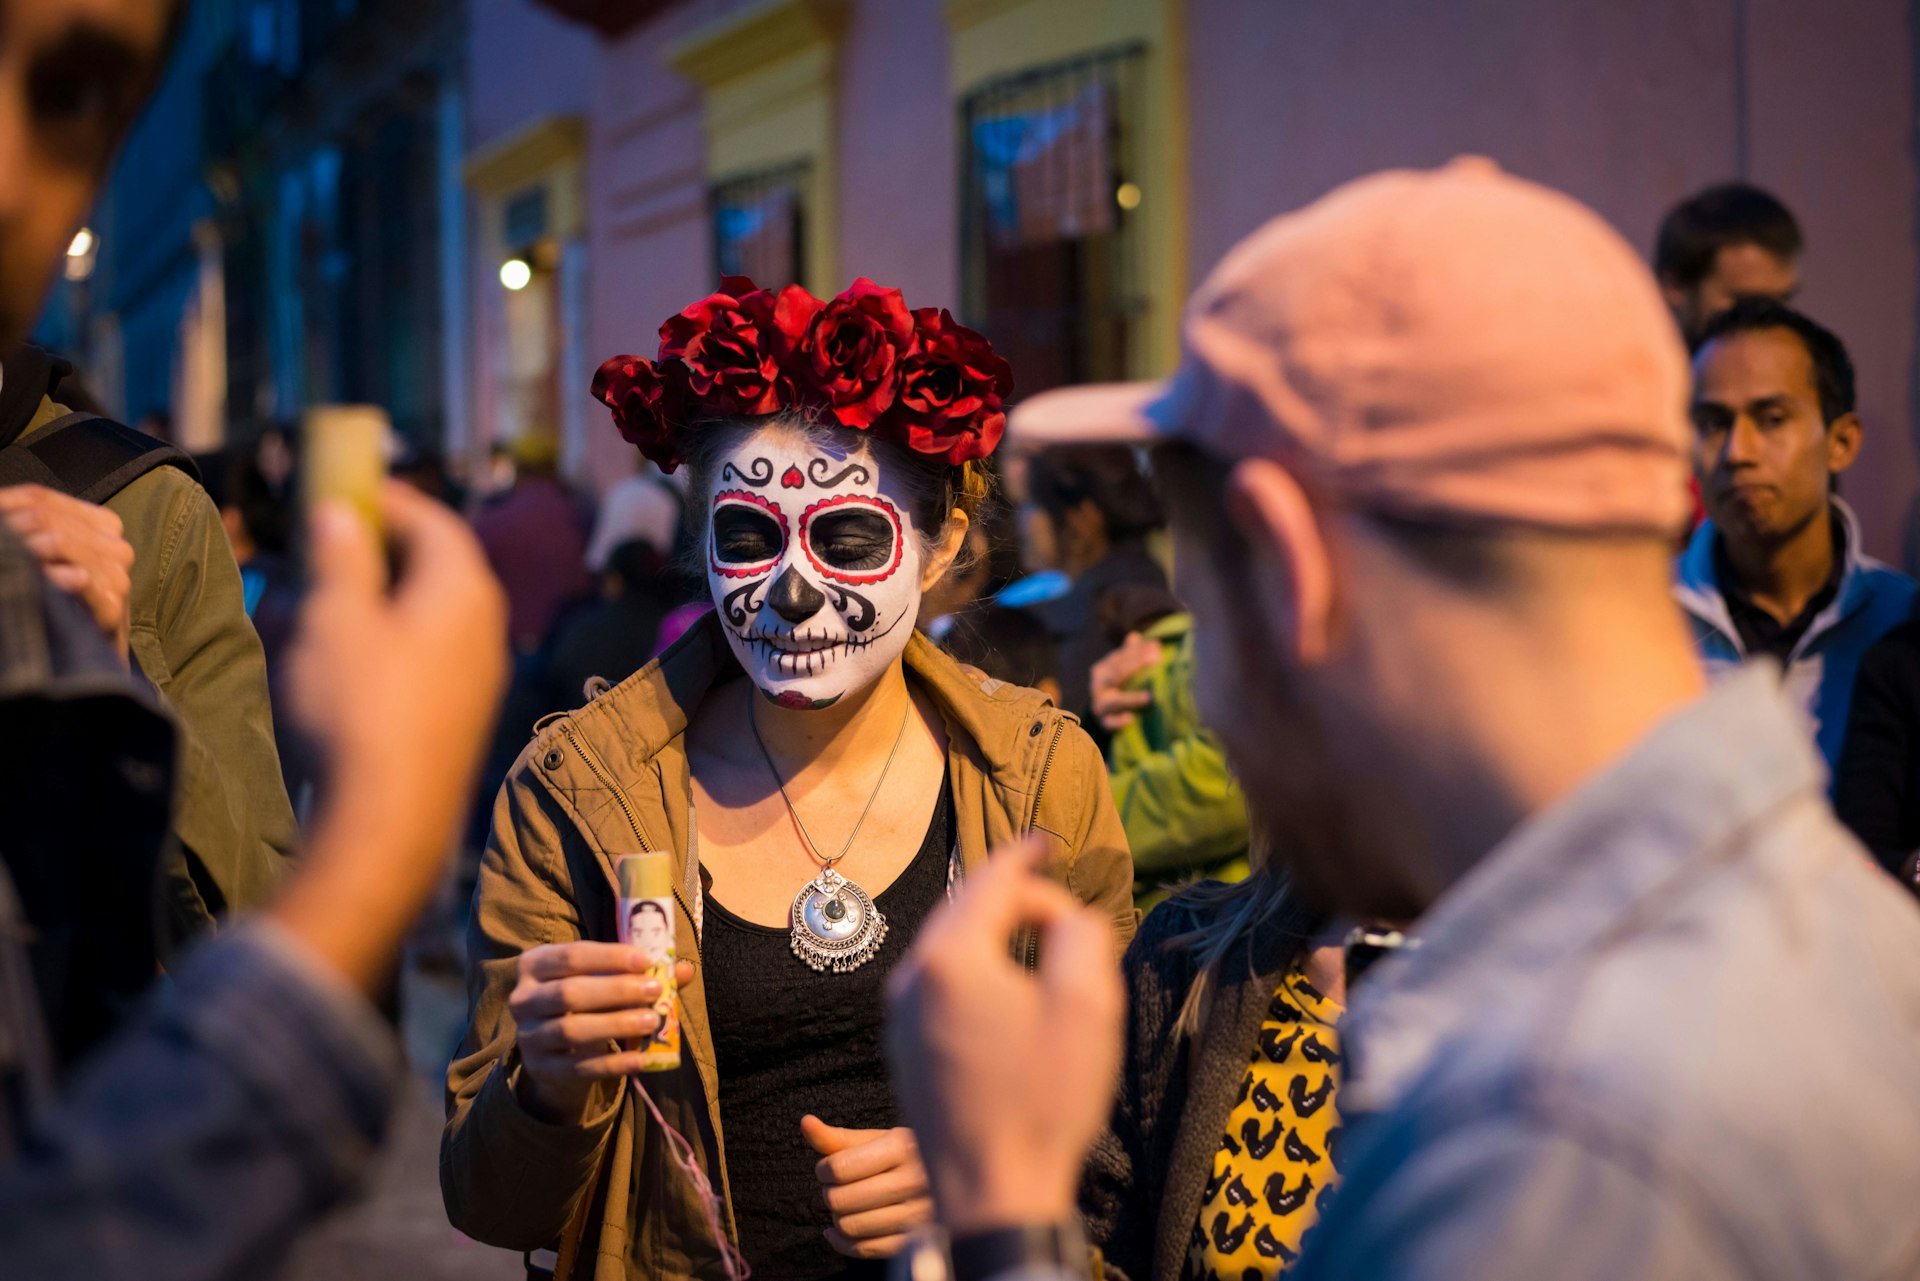 A young woman in a skeleton mask, holding an alcoholic drink while part of a crowd celebrating Day of the Dead in Oaxaca, Mexico.